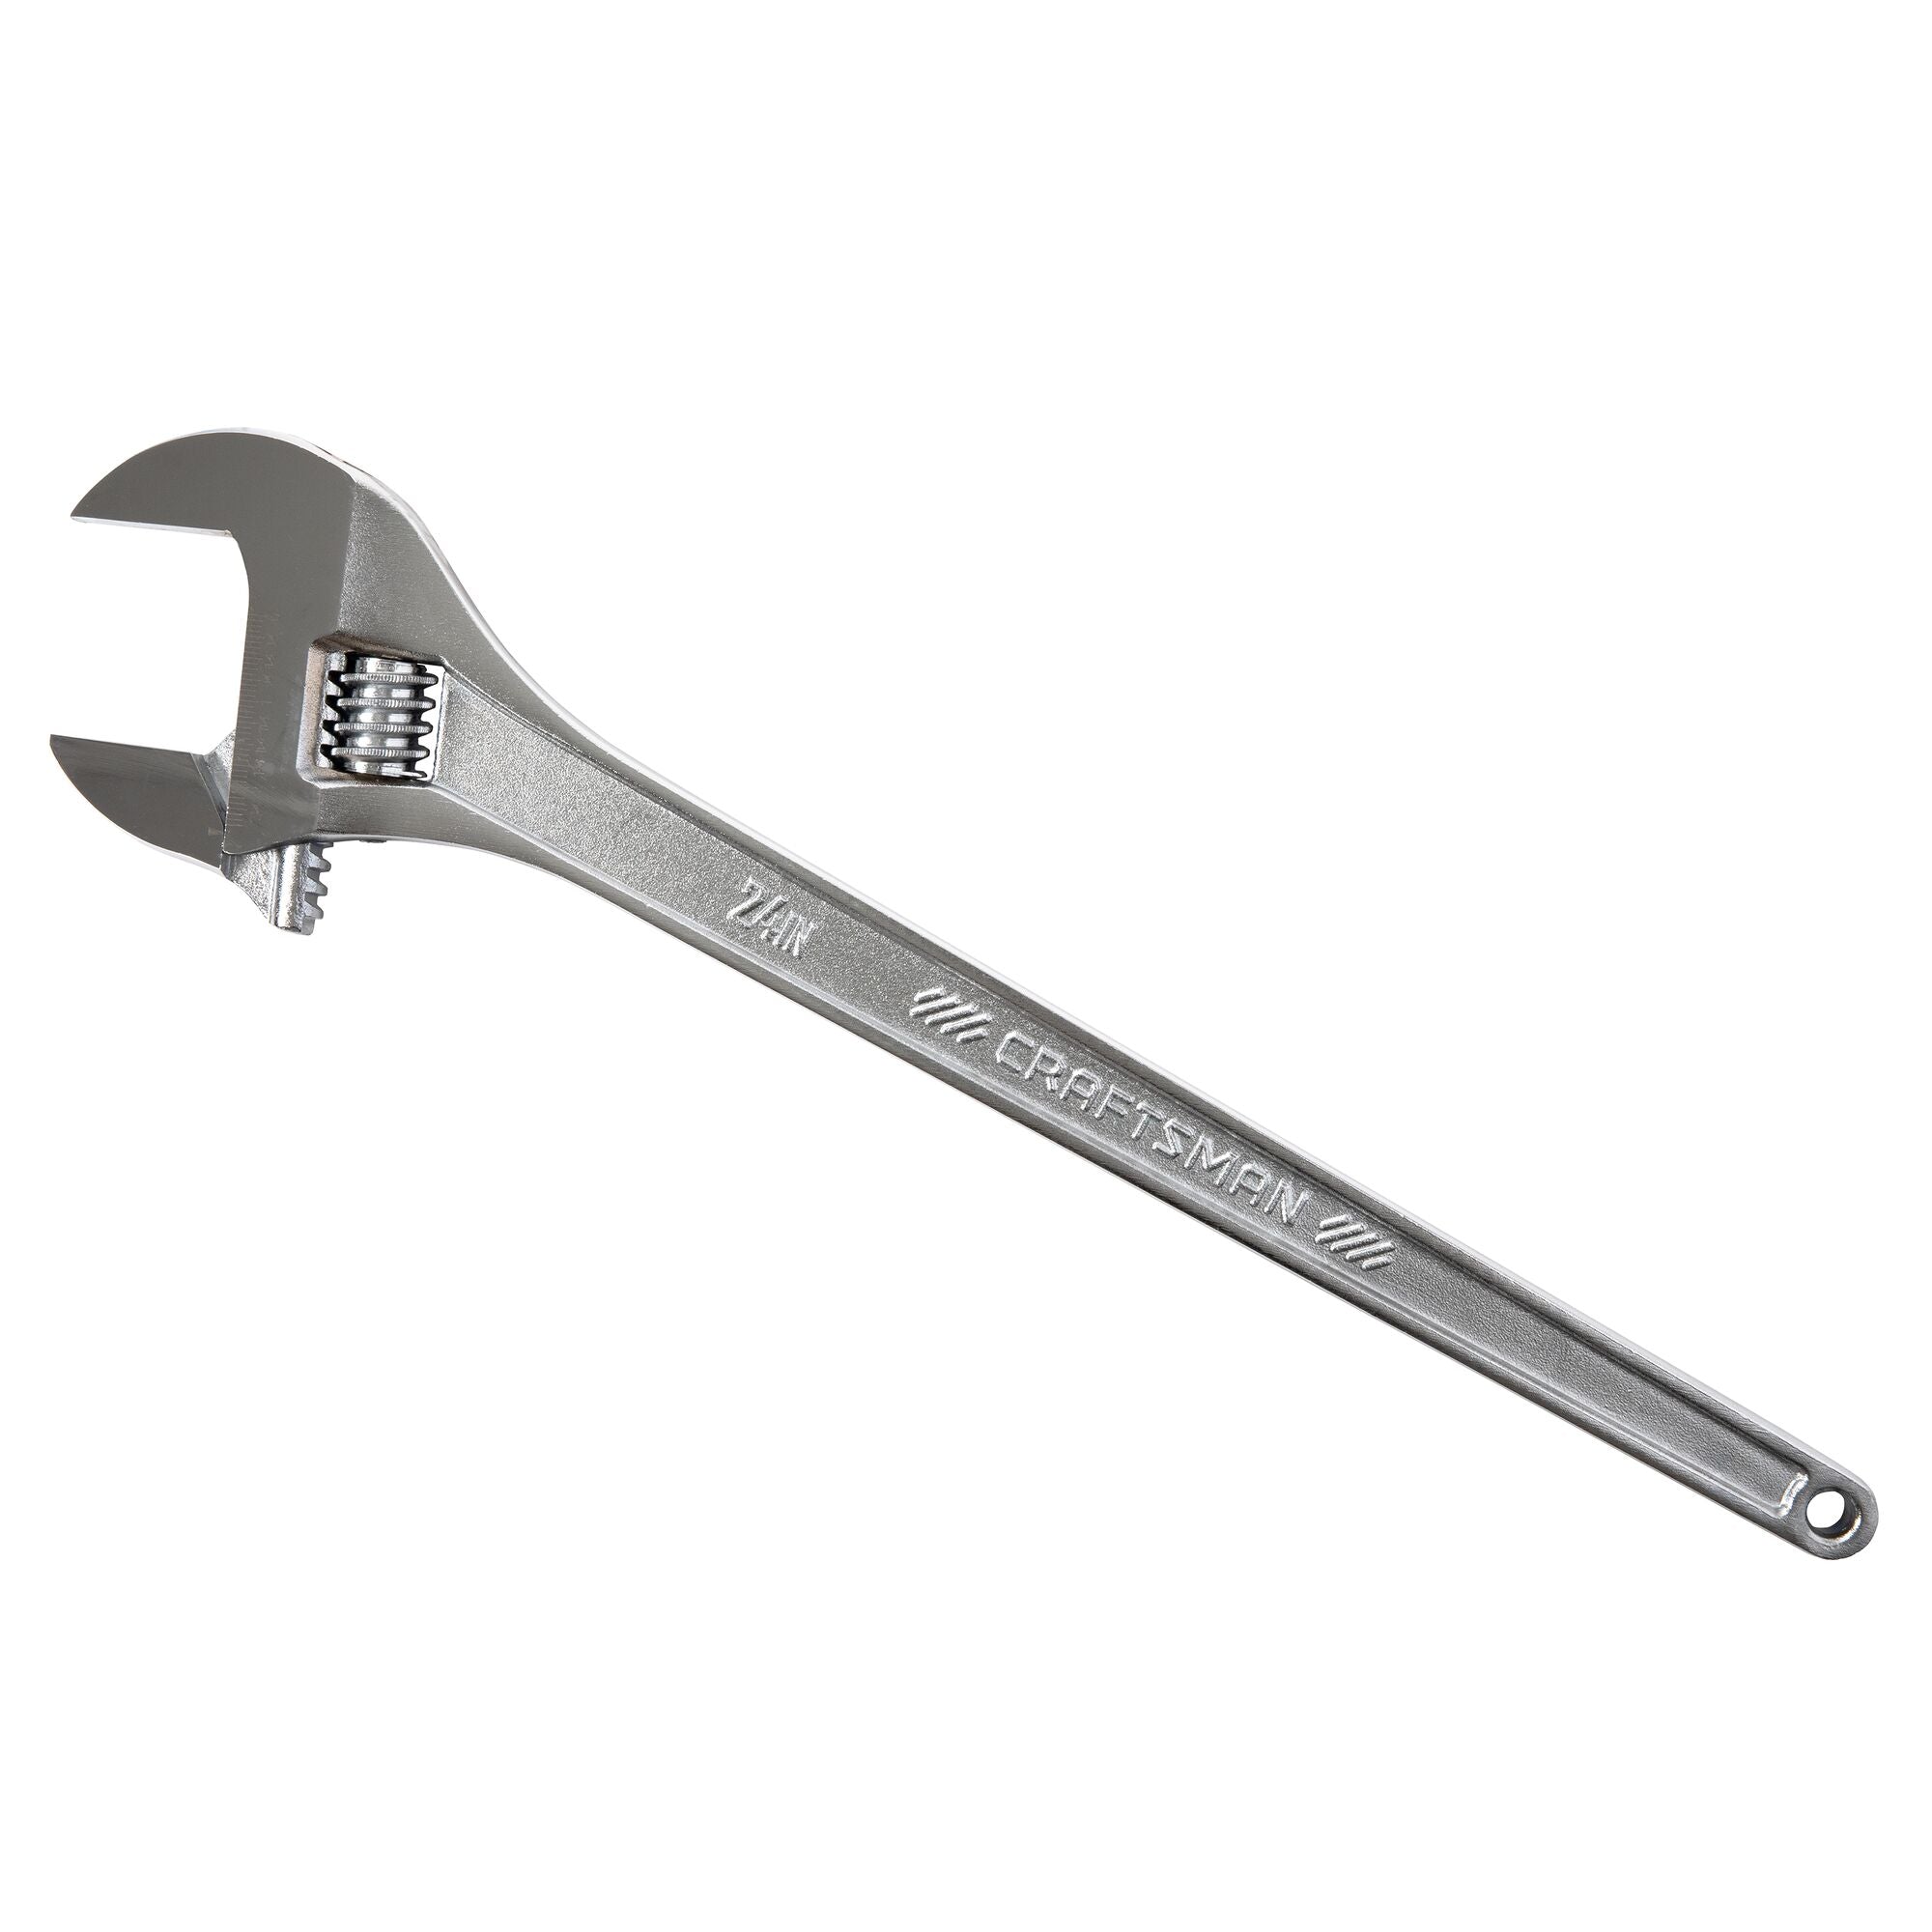 Spartan seacock wrench, W888, preowned - pfnman